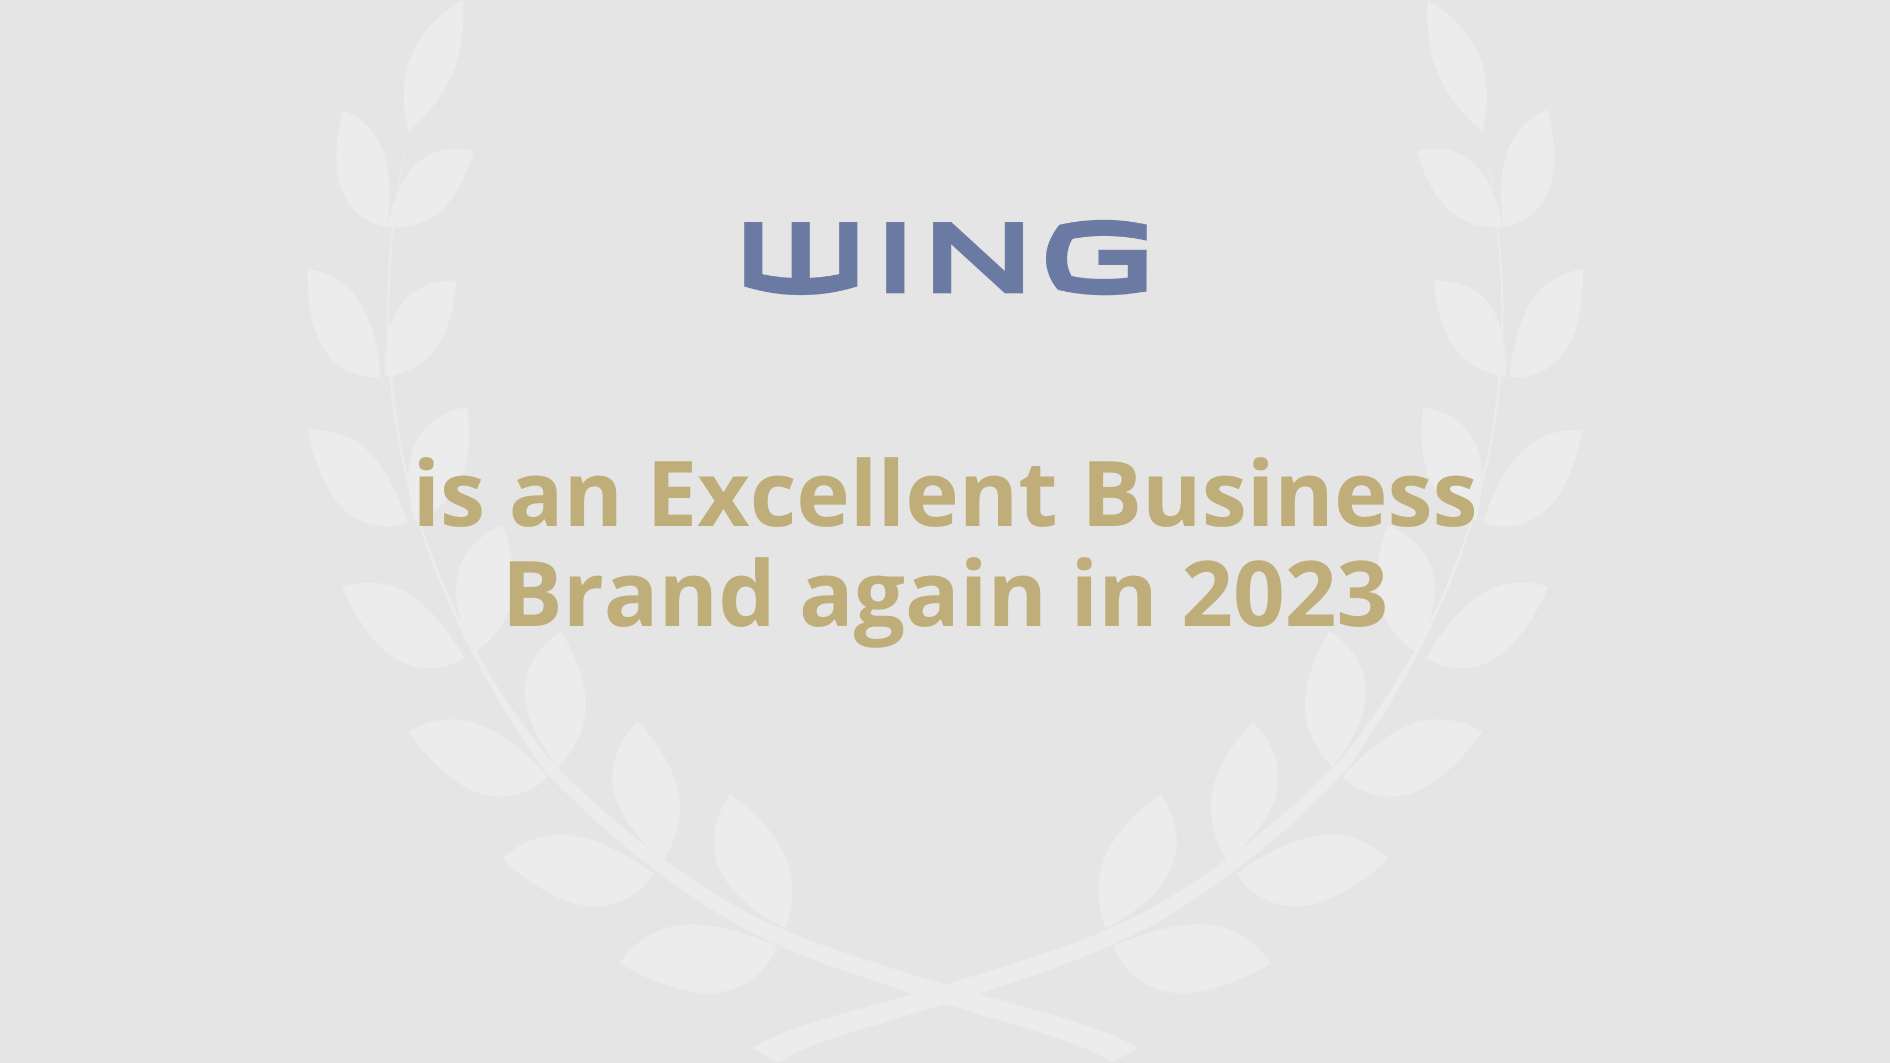 WING has won in MagyarBrands’ Excellent Business Brands category once again in 2023